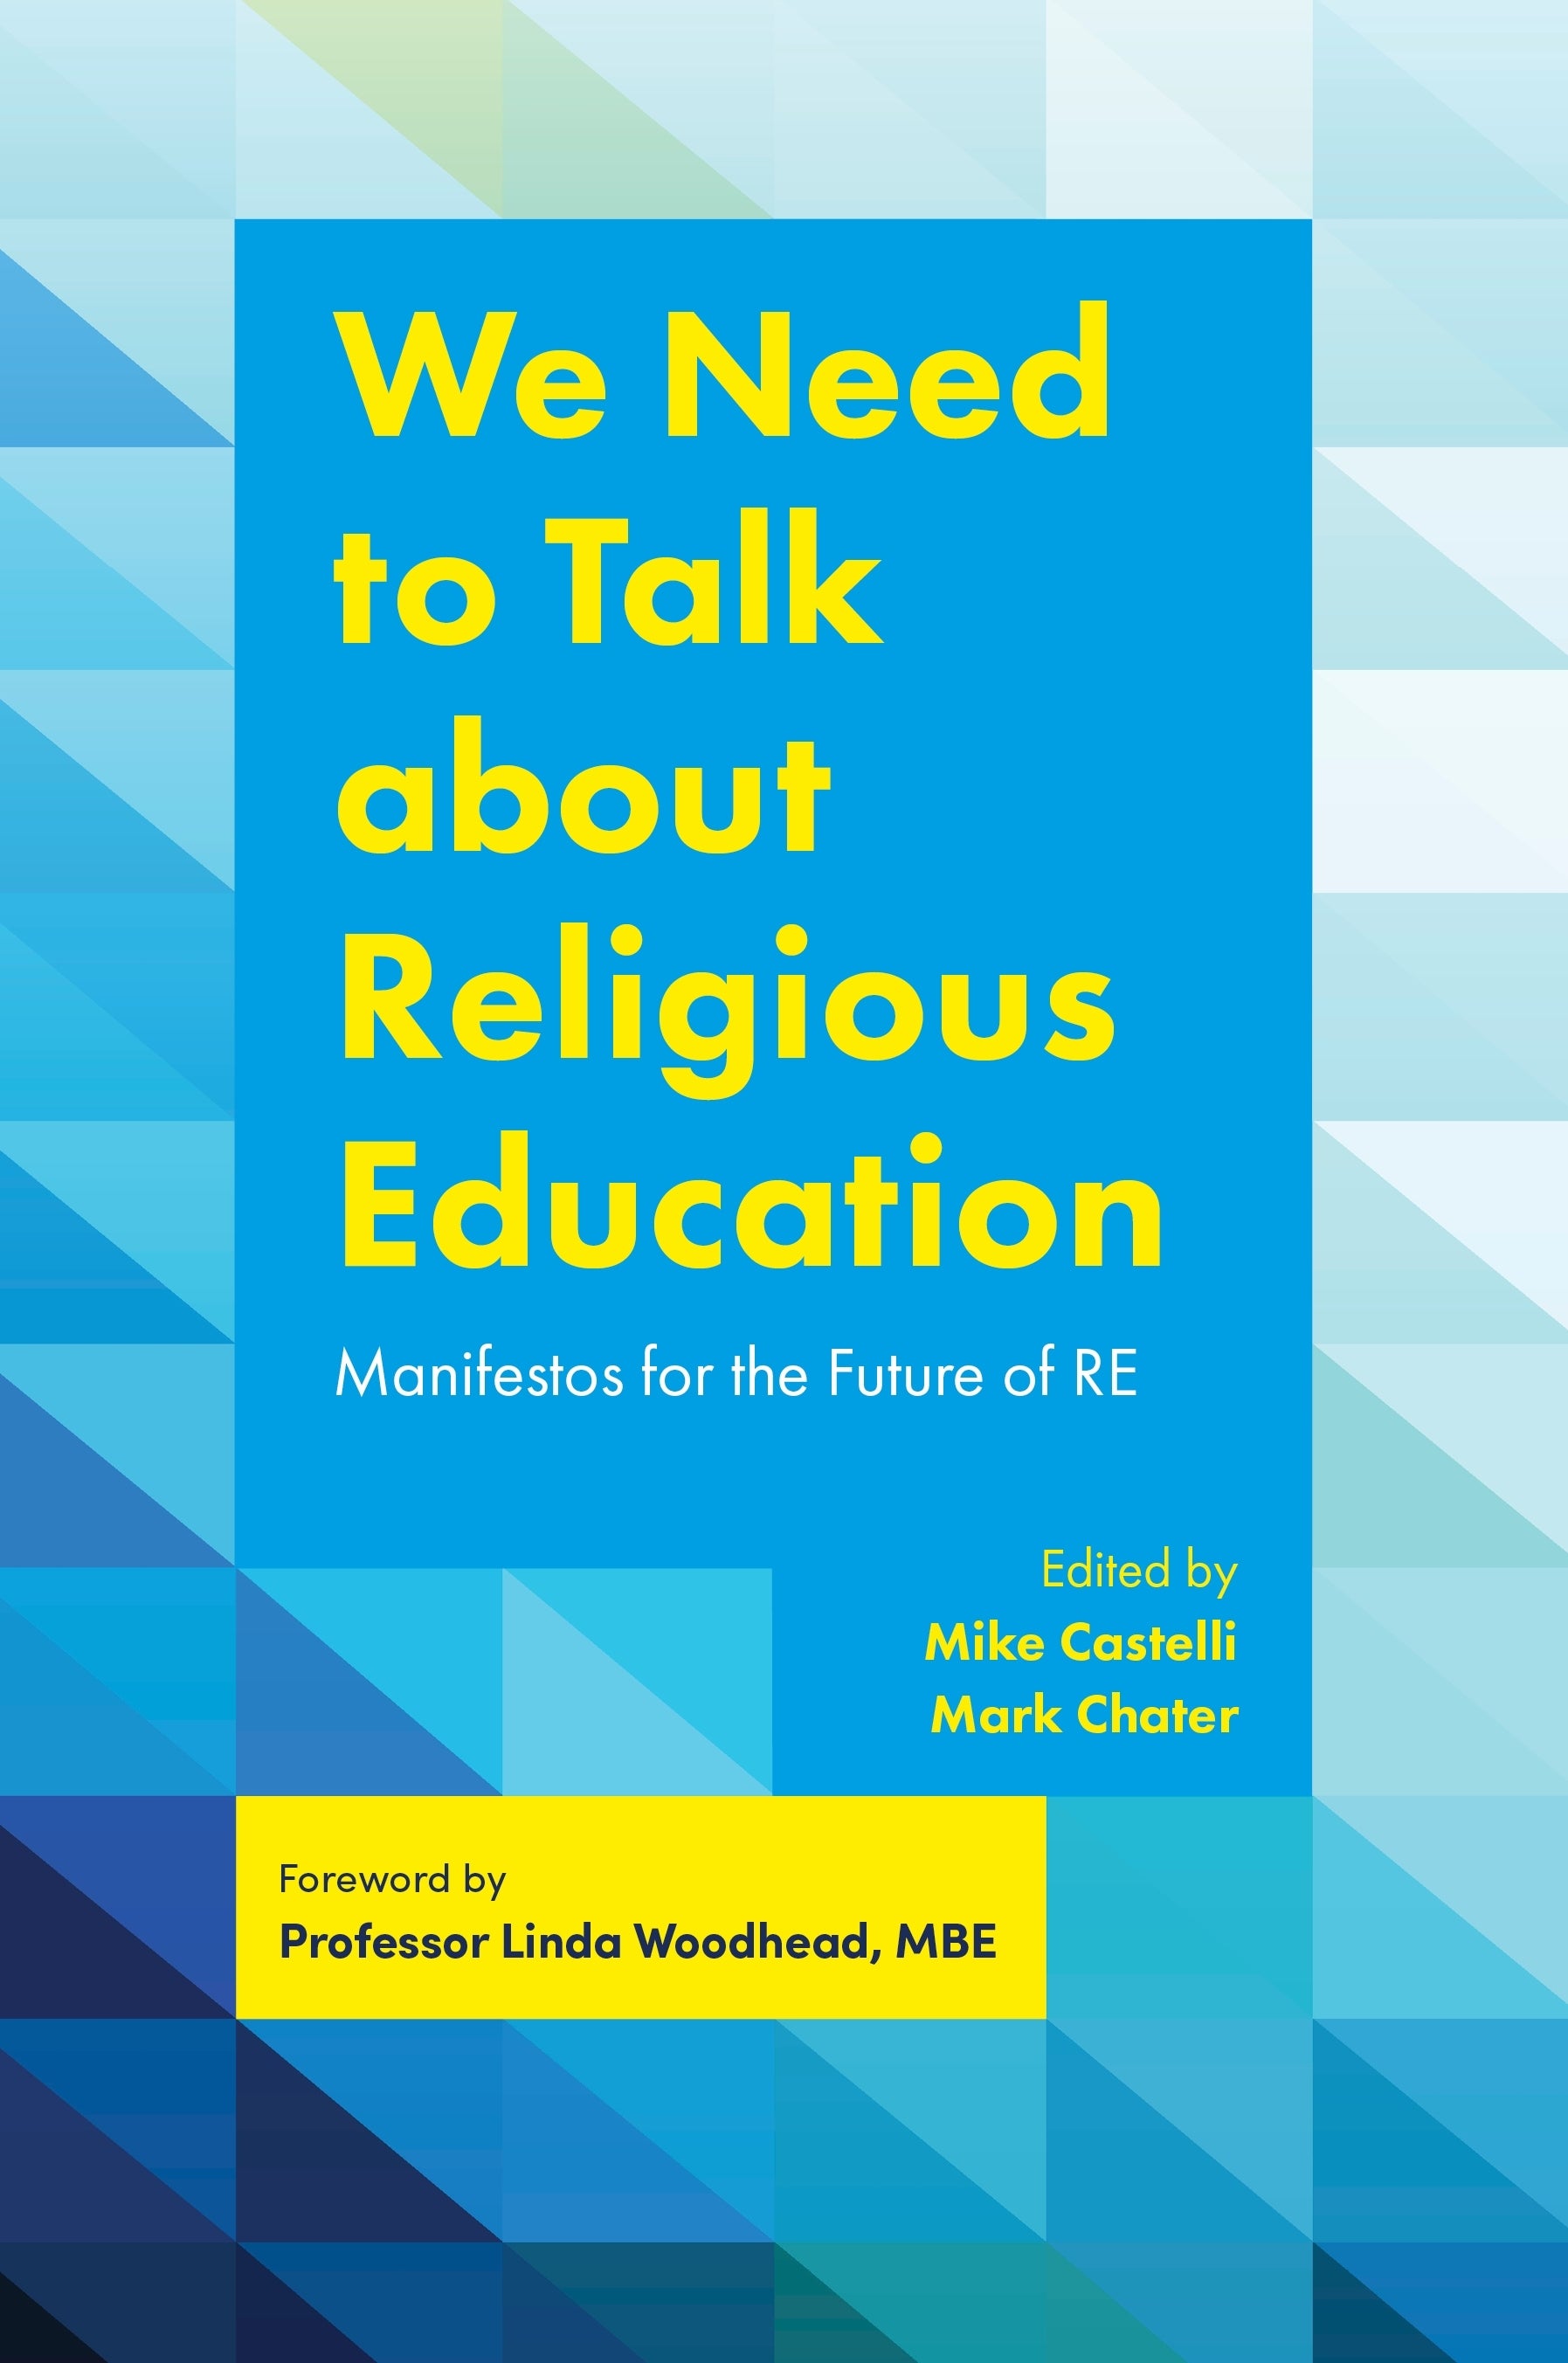 We Need to Talk about Religious Education by Mark Chater, Mike Castelli, Zameer Hussain, Linda Woodhead, No Author Listed